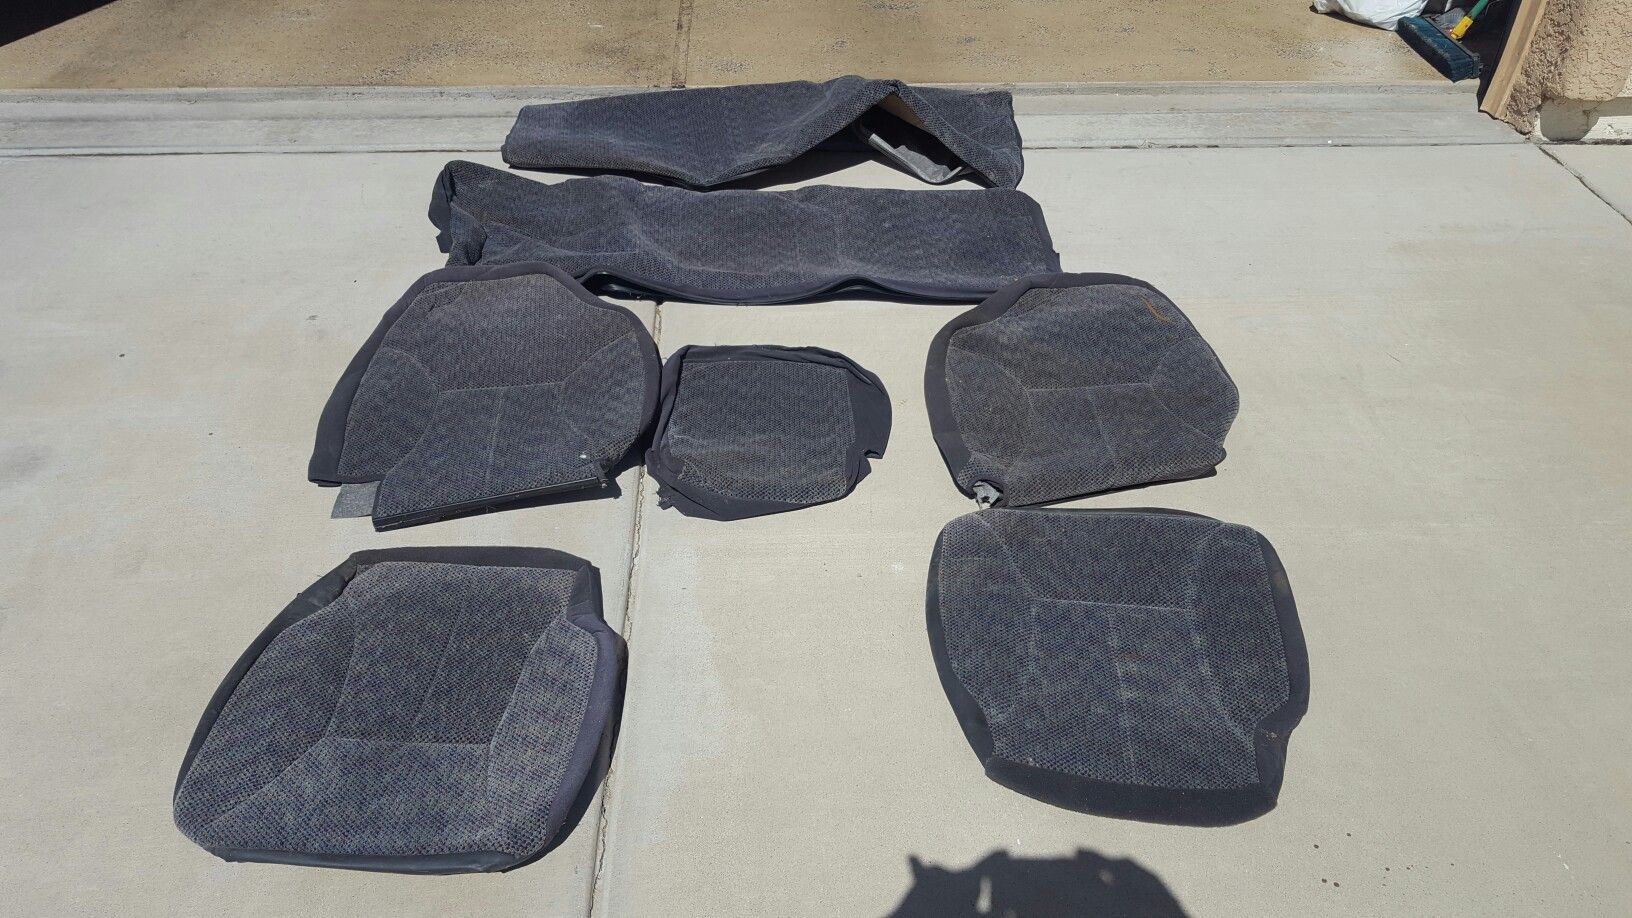 Dodge Ram OEM seat covers, never used.